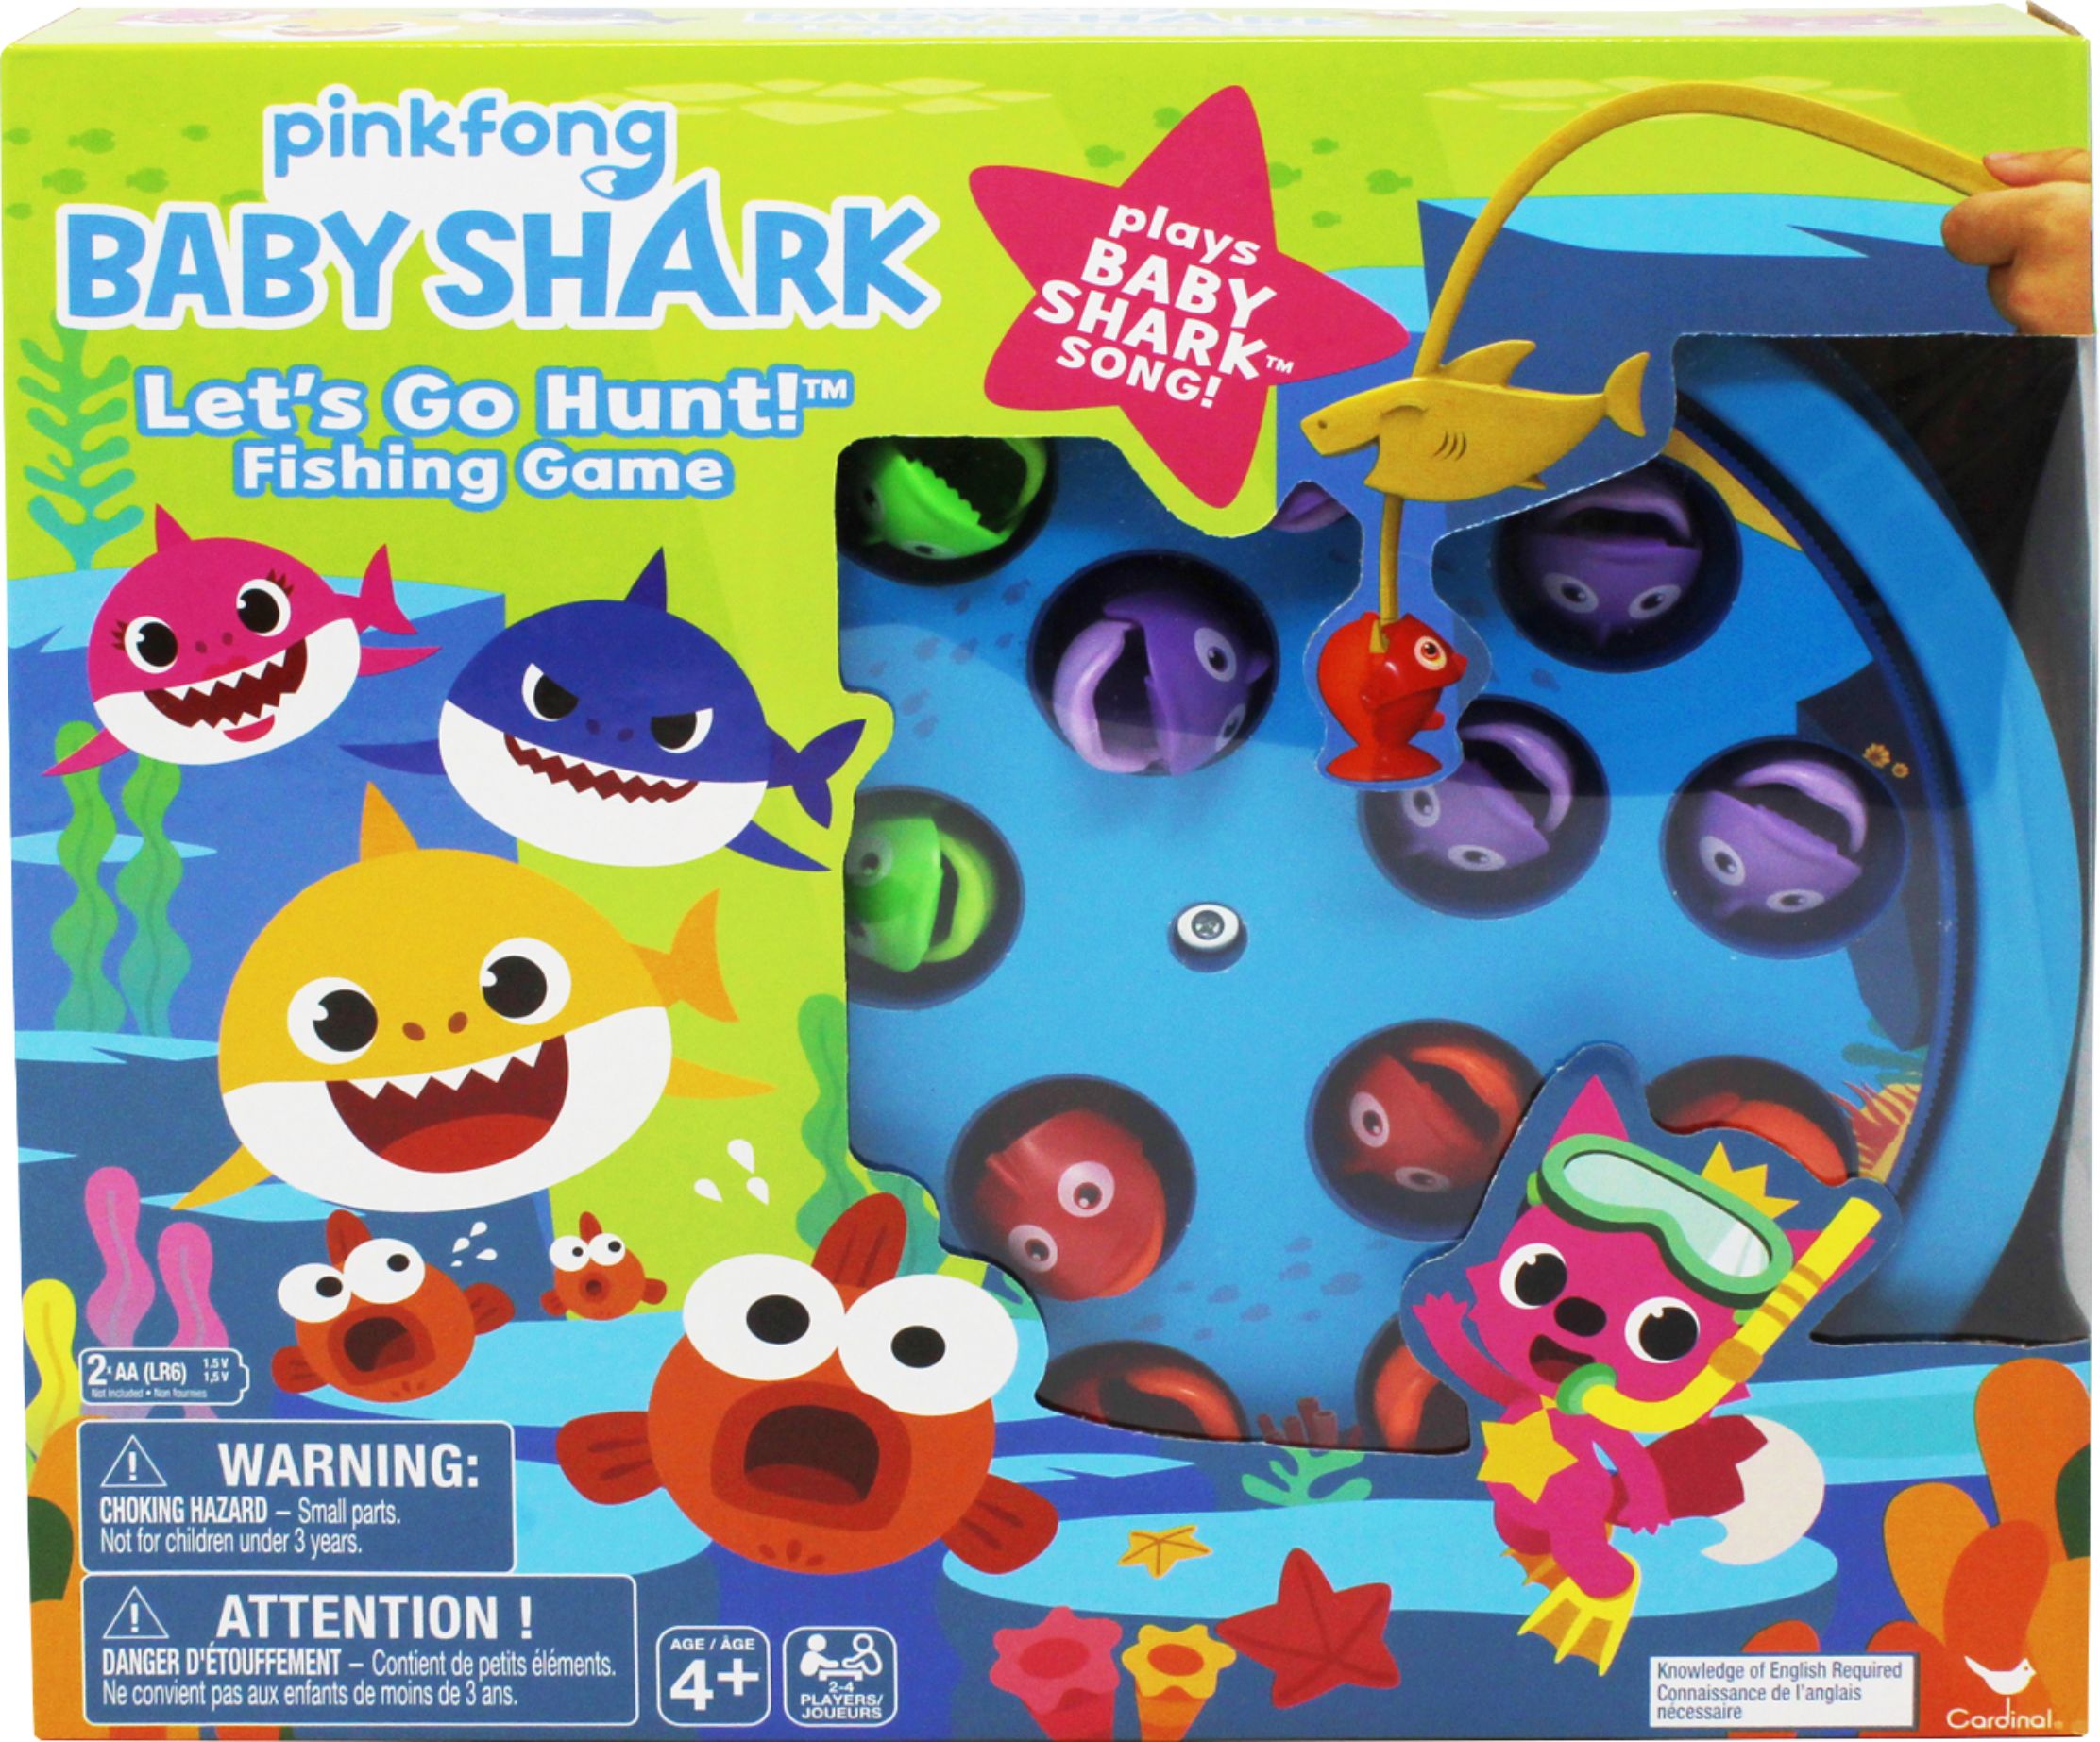 Best Buy: Pinkfong Let's Go Hunt Fishing Game Action/Skill Game